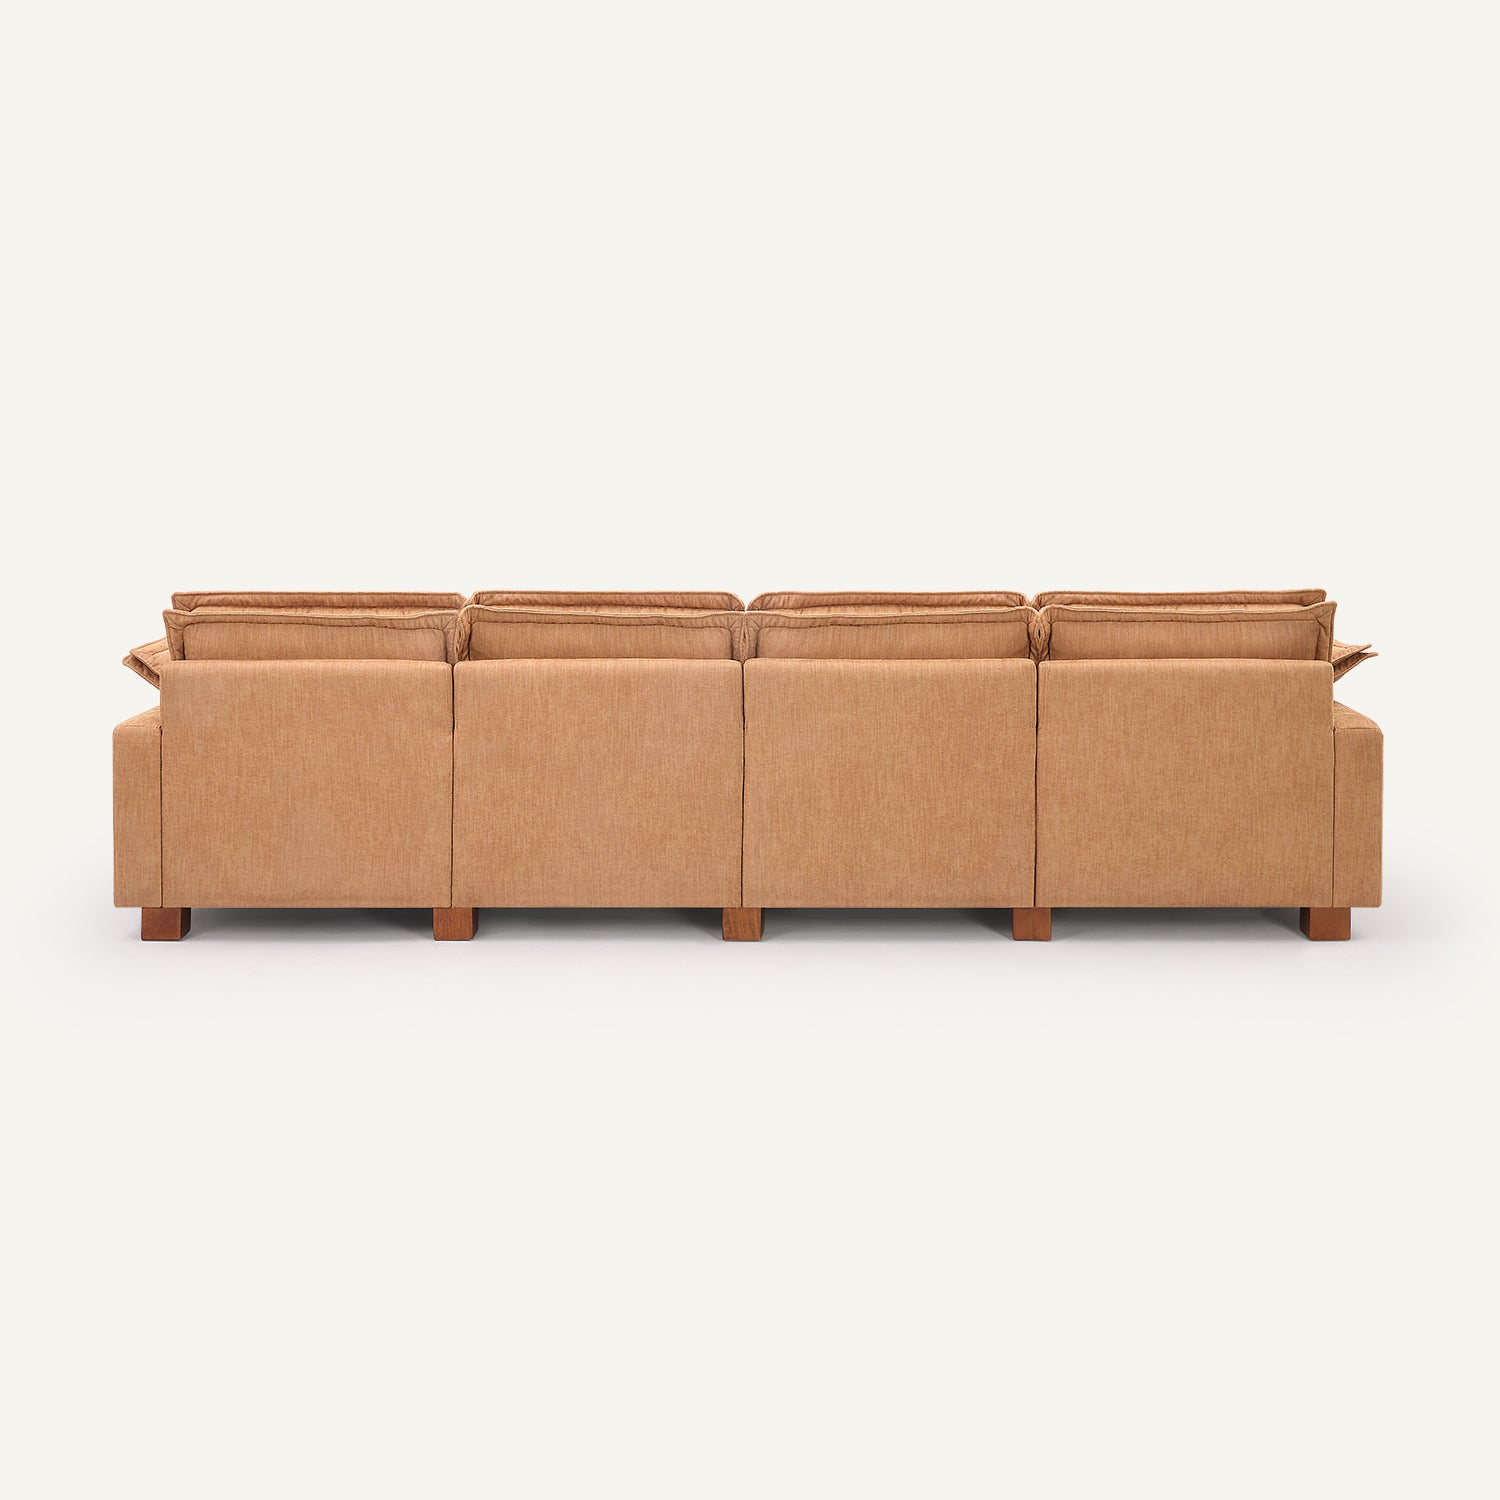 Stacked Tan Linen 5-Seat Sofa with Chaise